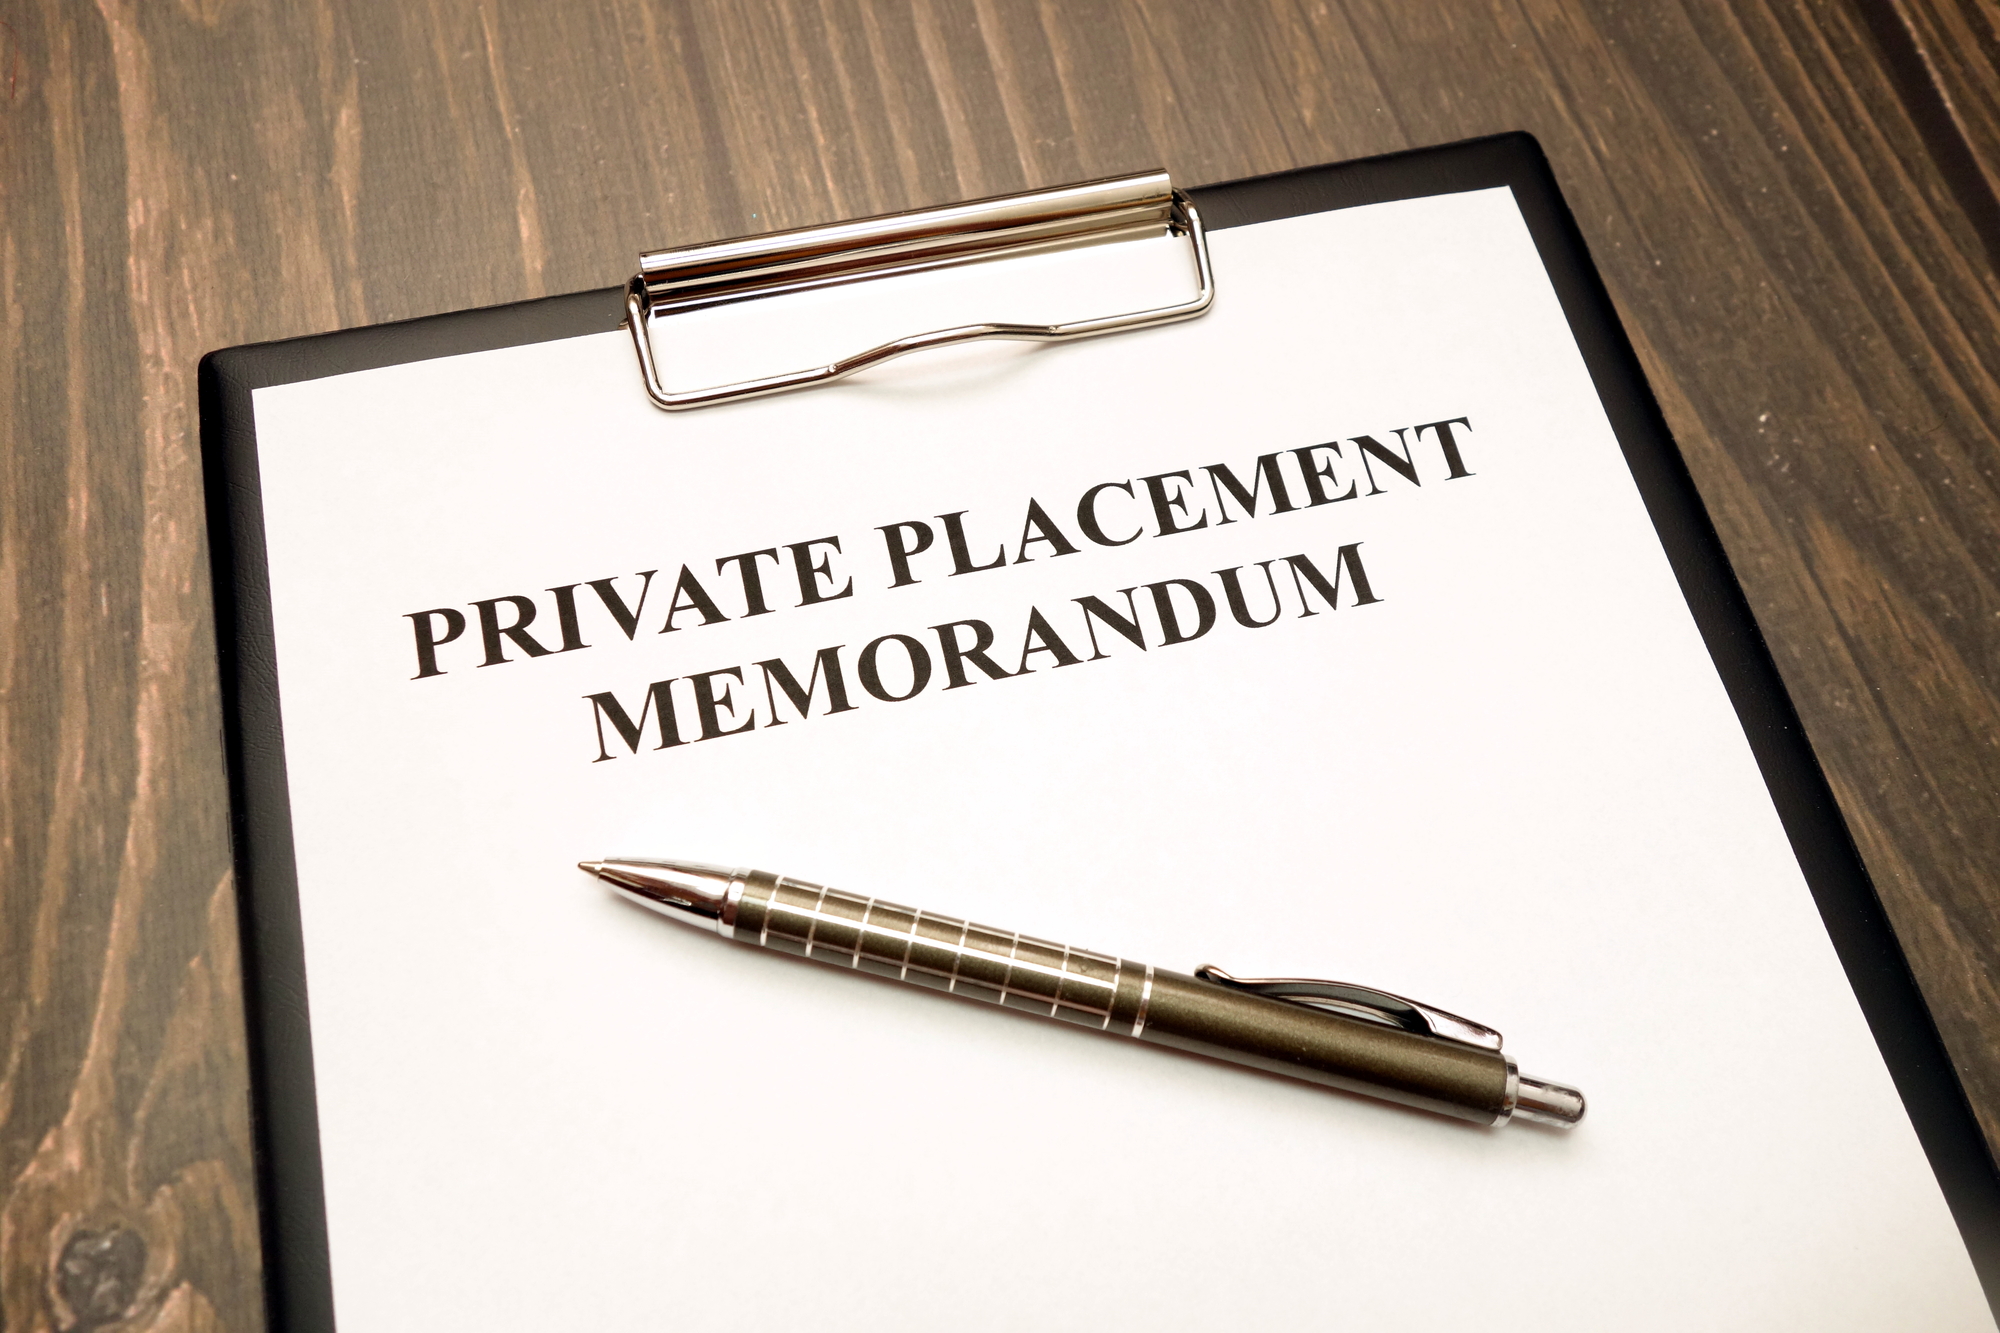 A document titled “private placement memorandum” is attached to a clipboard with a pen sitting on top of it.